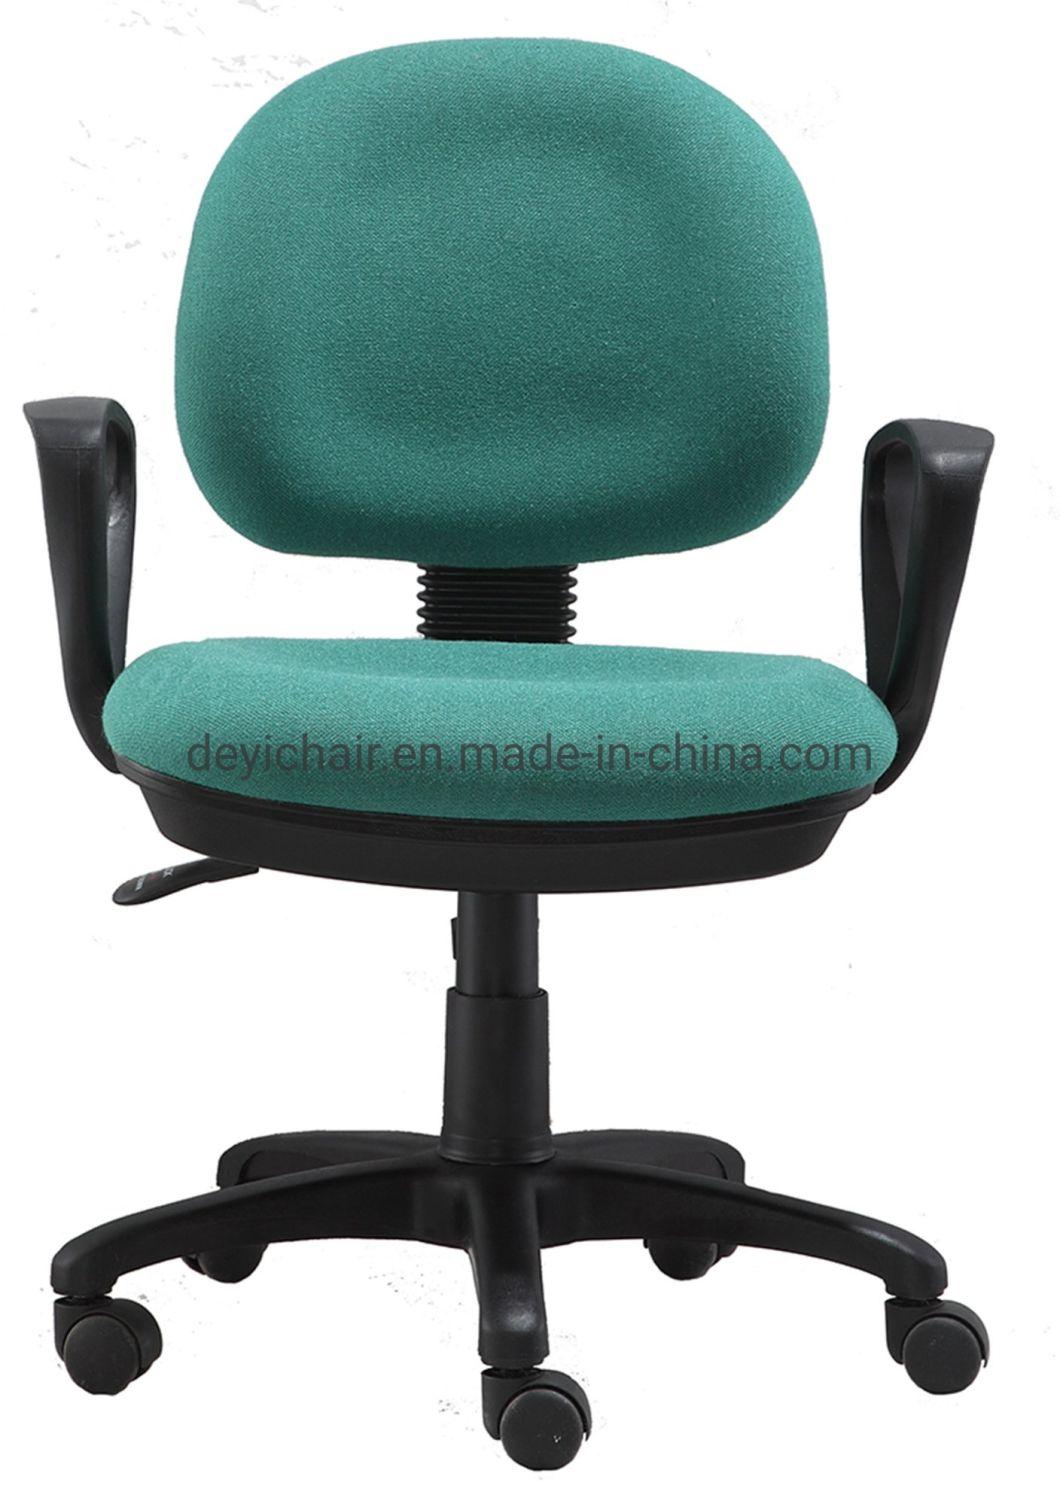 Simple Tilting Mechanism with PP Armrest Small Back B300mm Nylon Base Green Color Office Chair